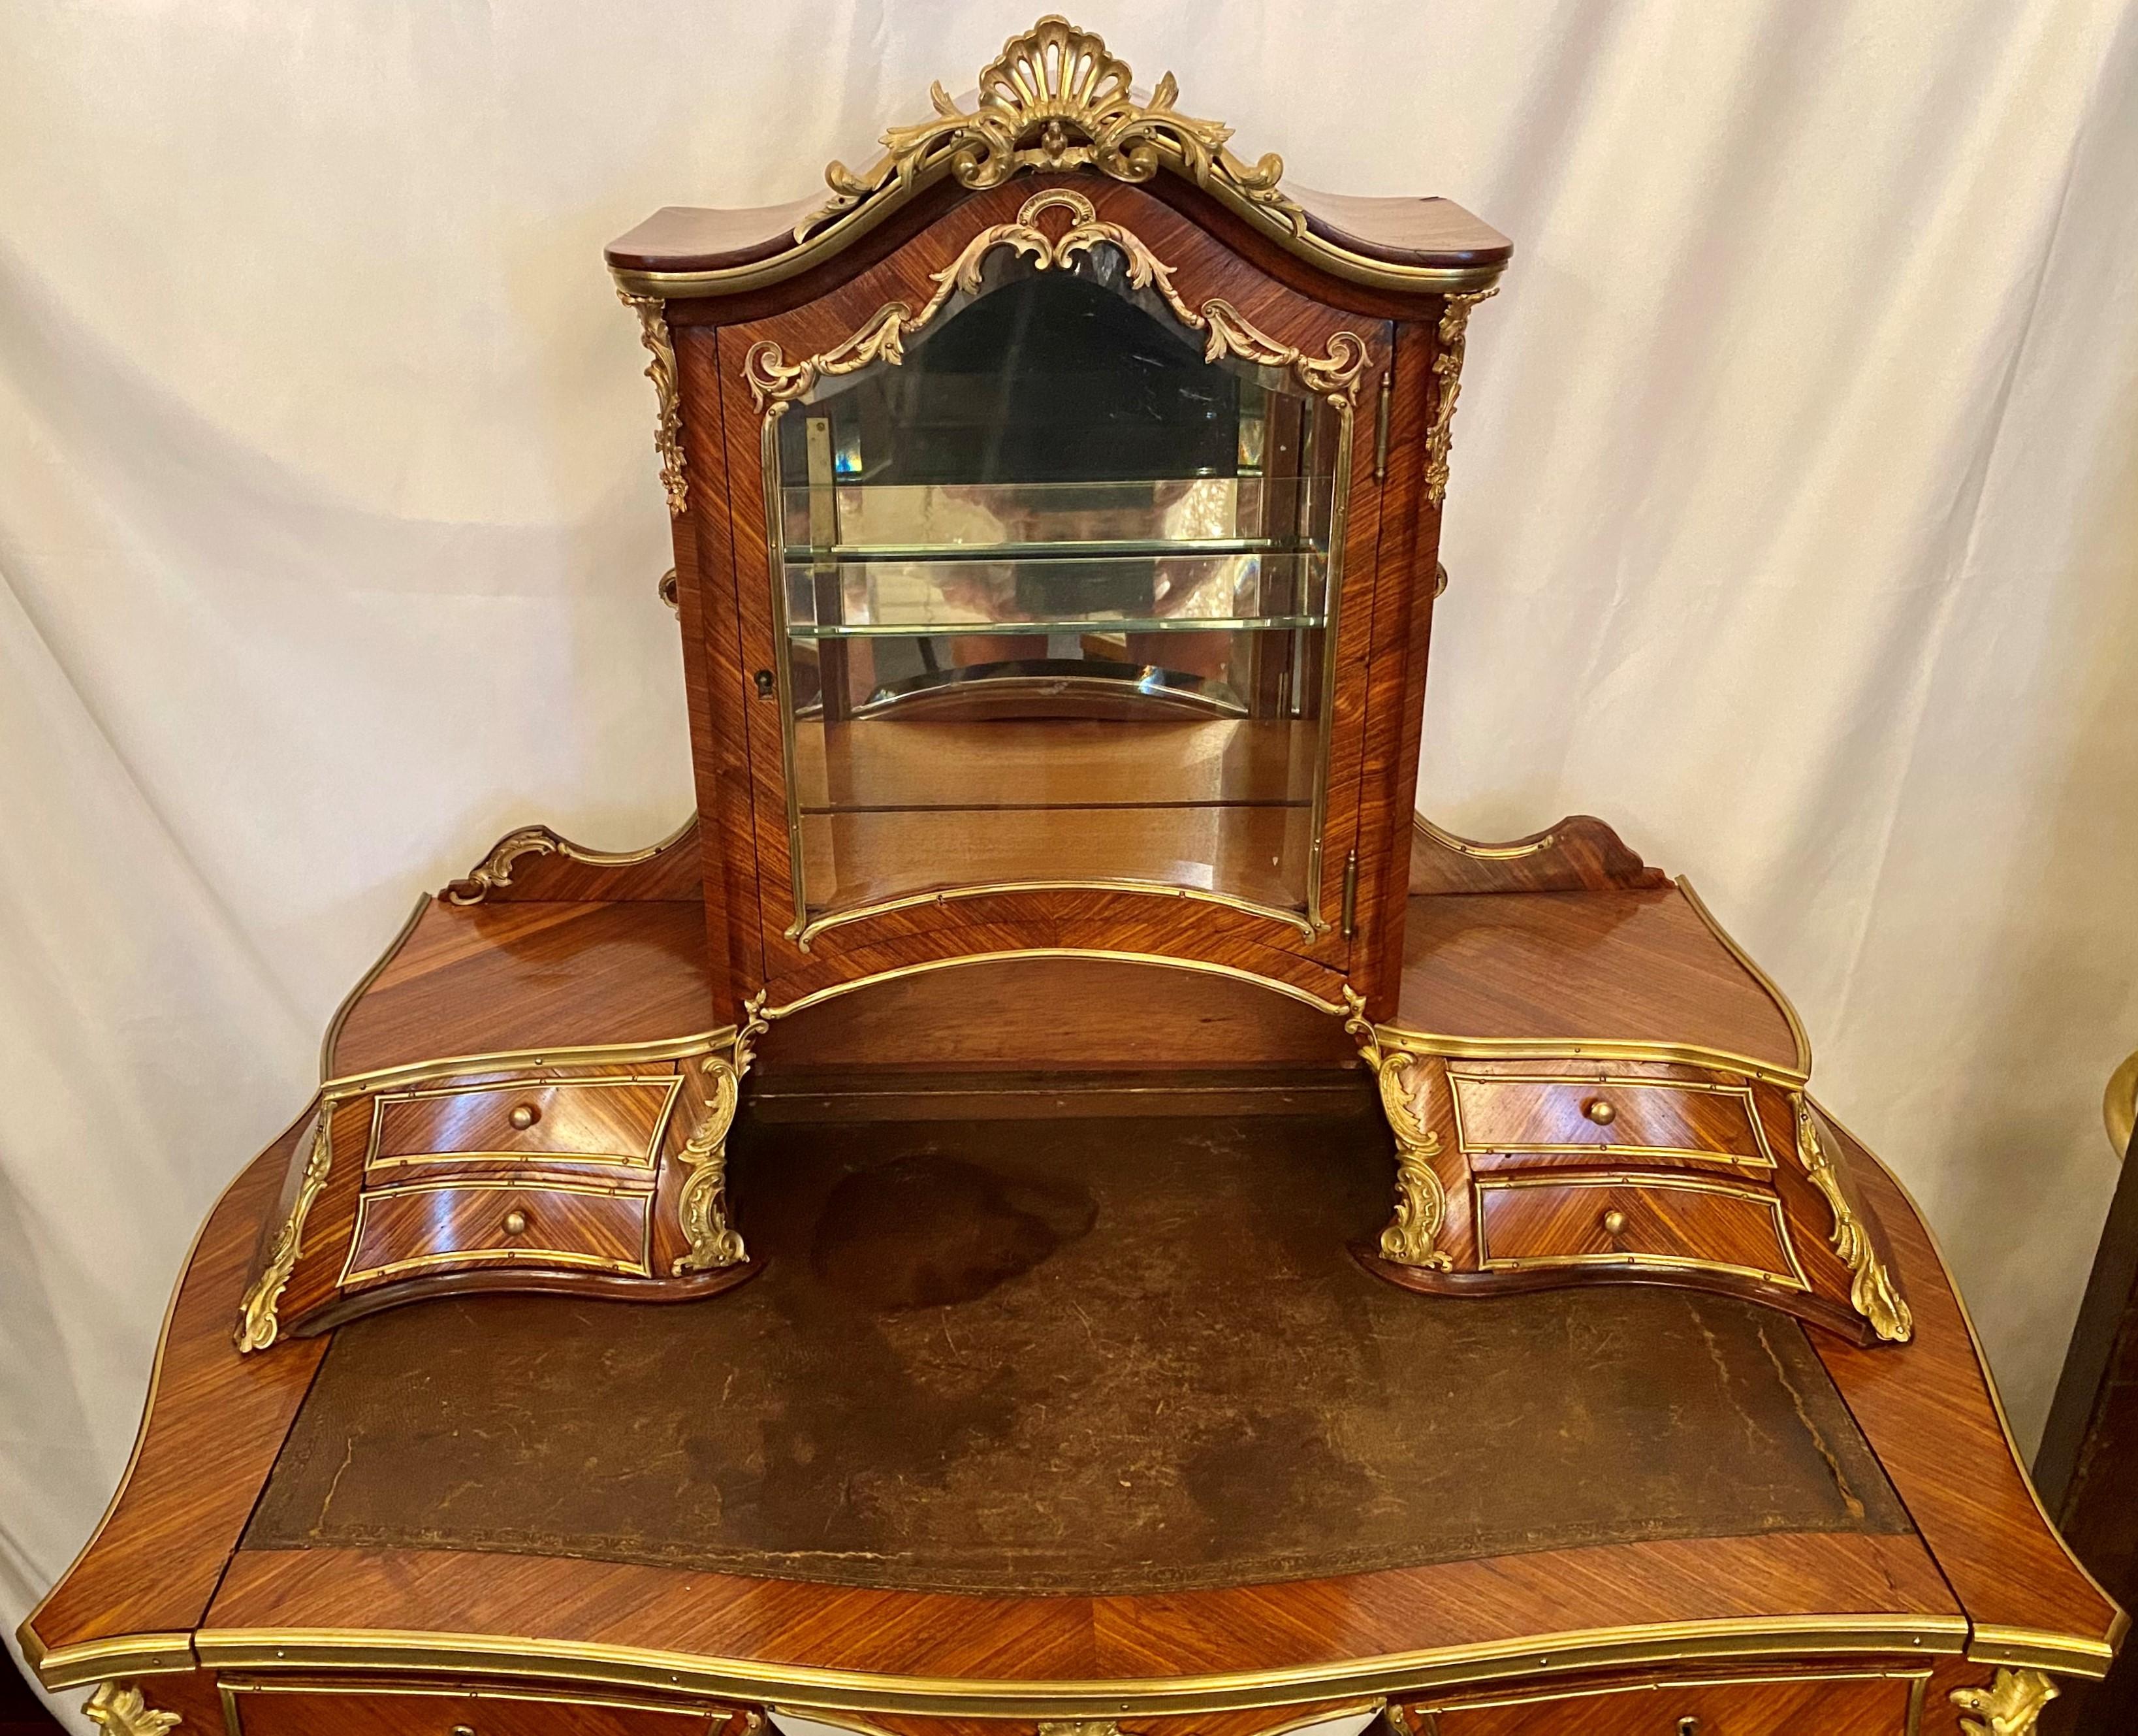 Antique French rosewood and gold bronze writing desk or vanity, circa 1880-1890.
30